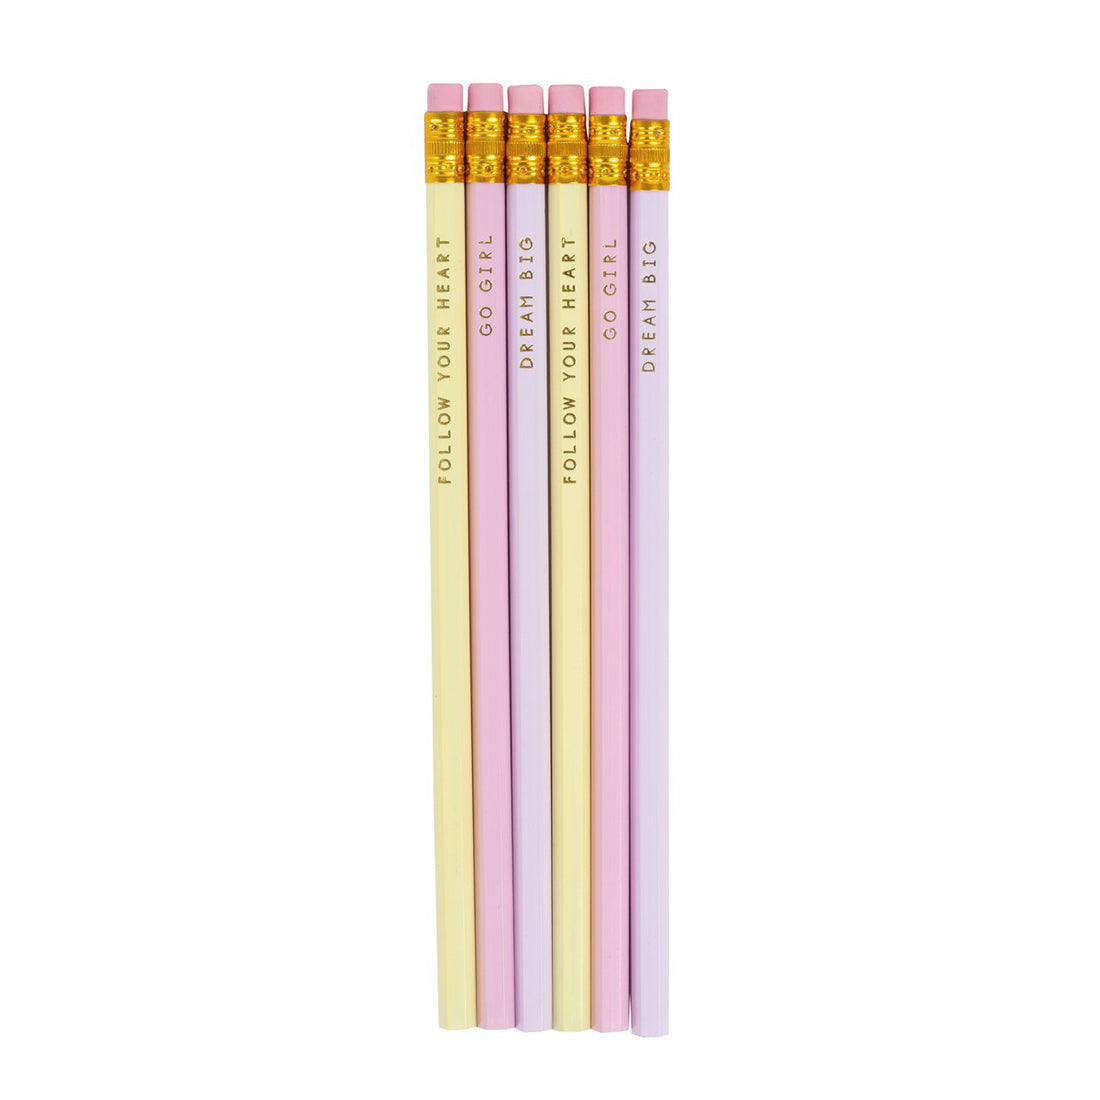 rjb-stone-pastel-write-your-own-story-pencil- (2)